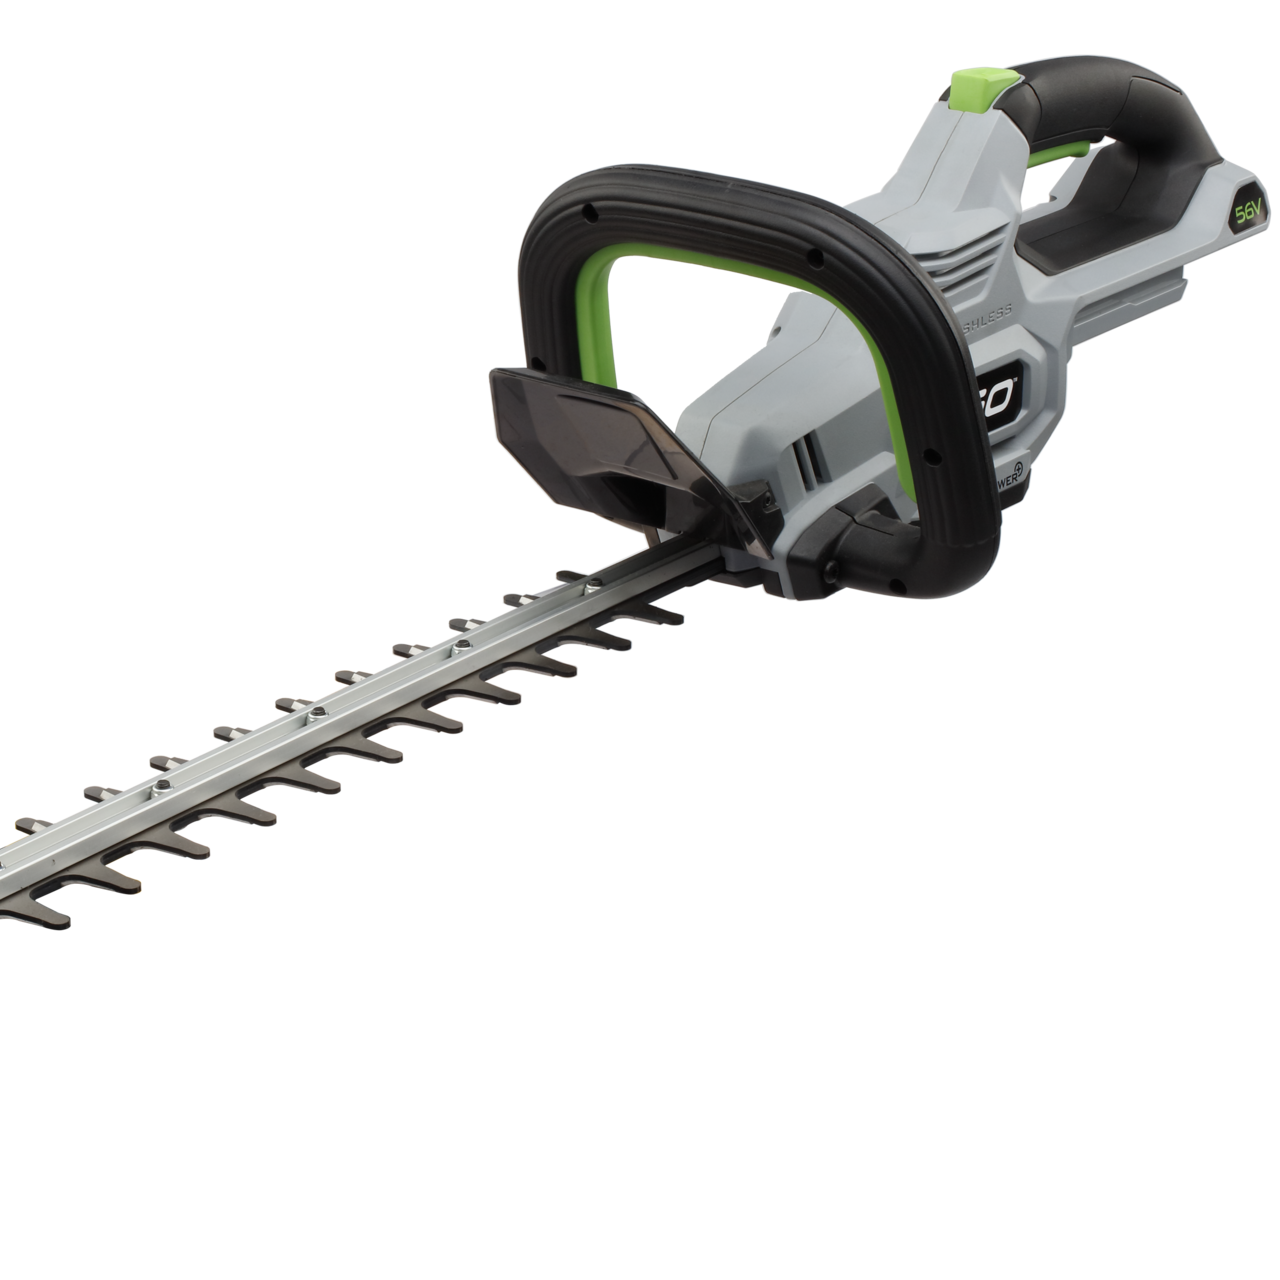 Image of EGO HT2411E 56v 61cm Cordless Hedge Trimmer (With 2.5 Ah Battery & Fast Charger)